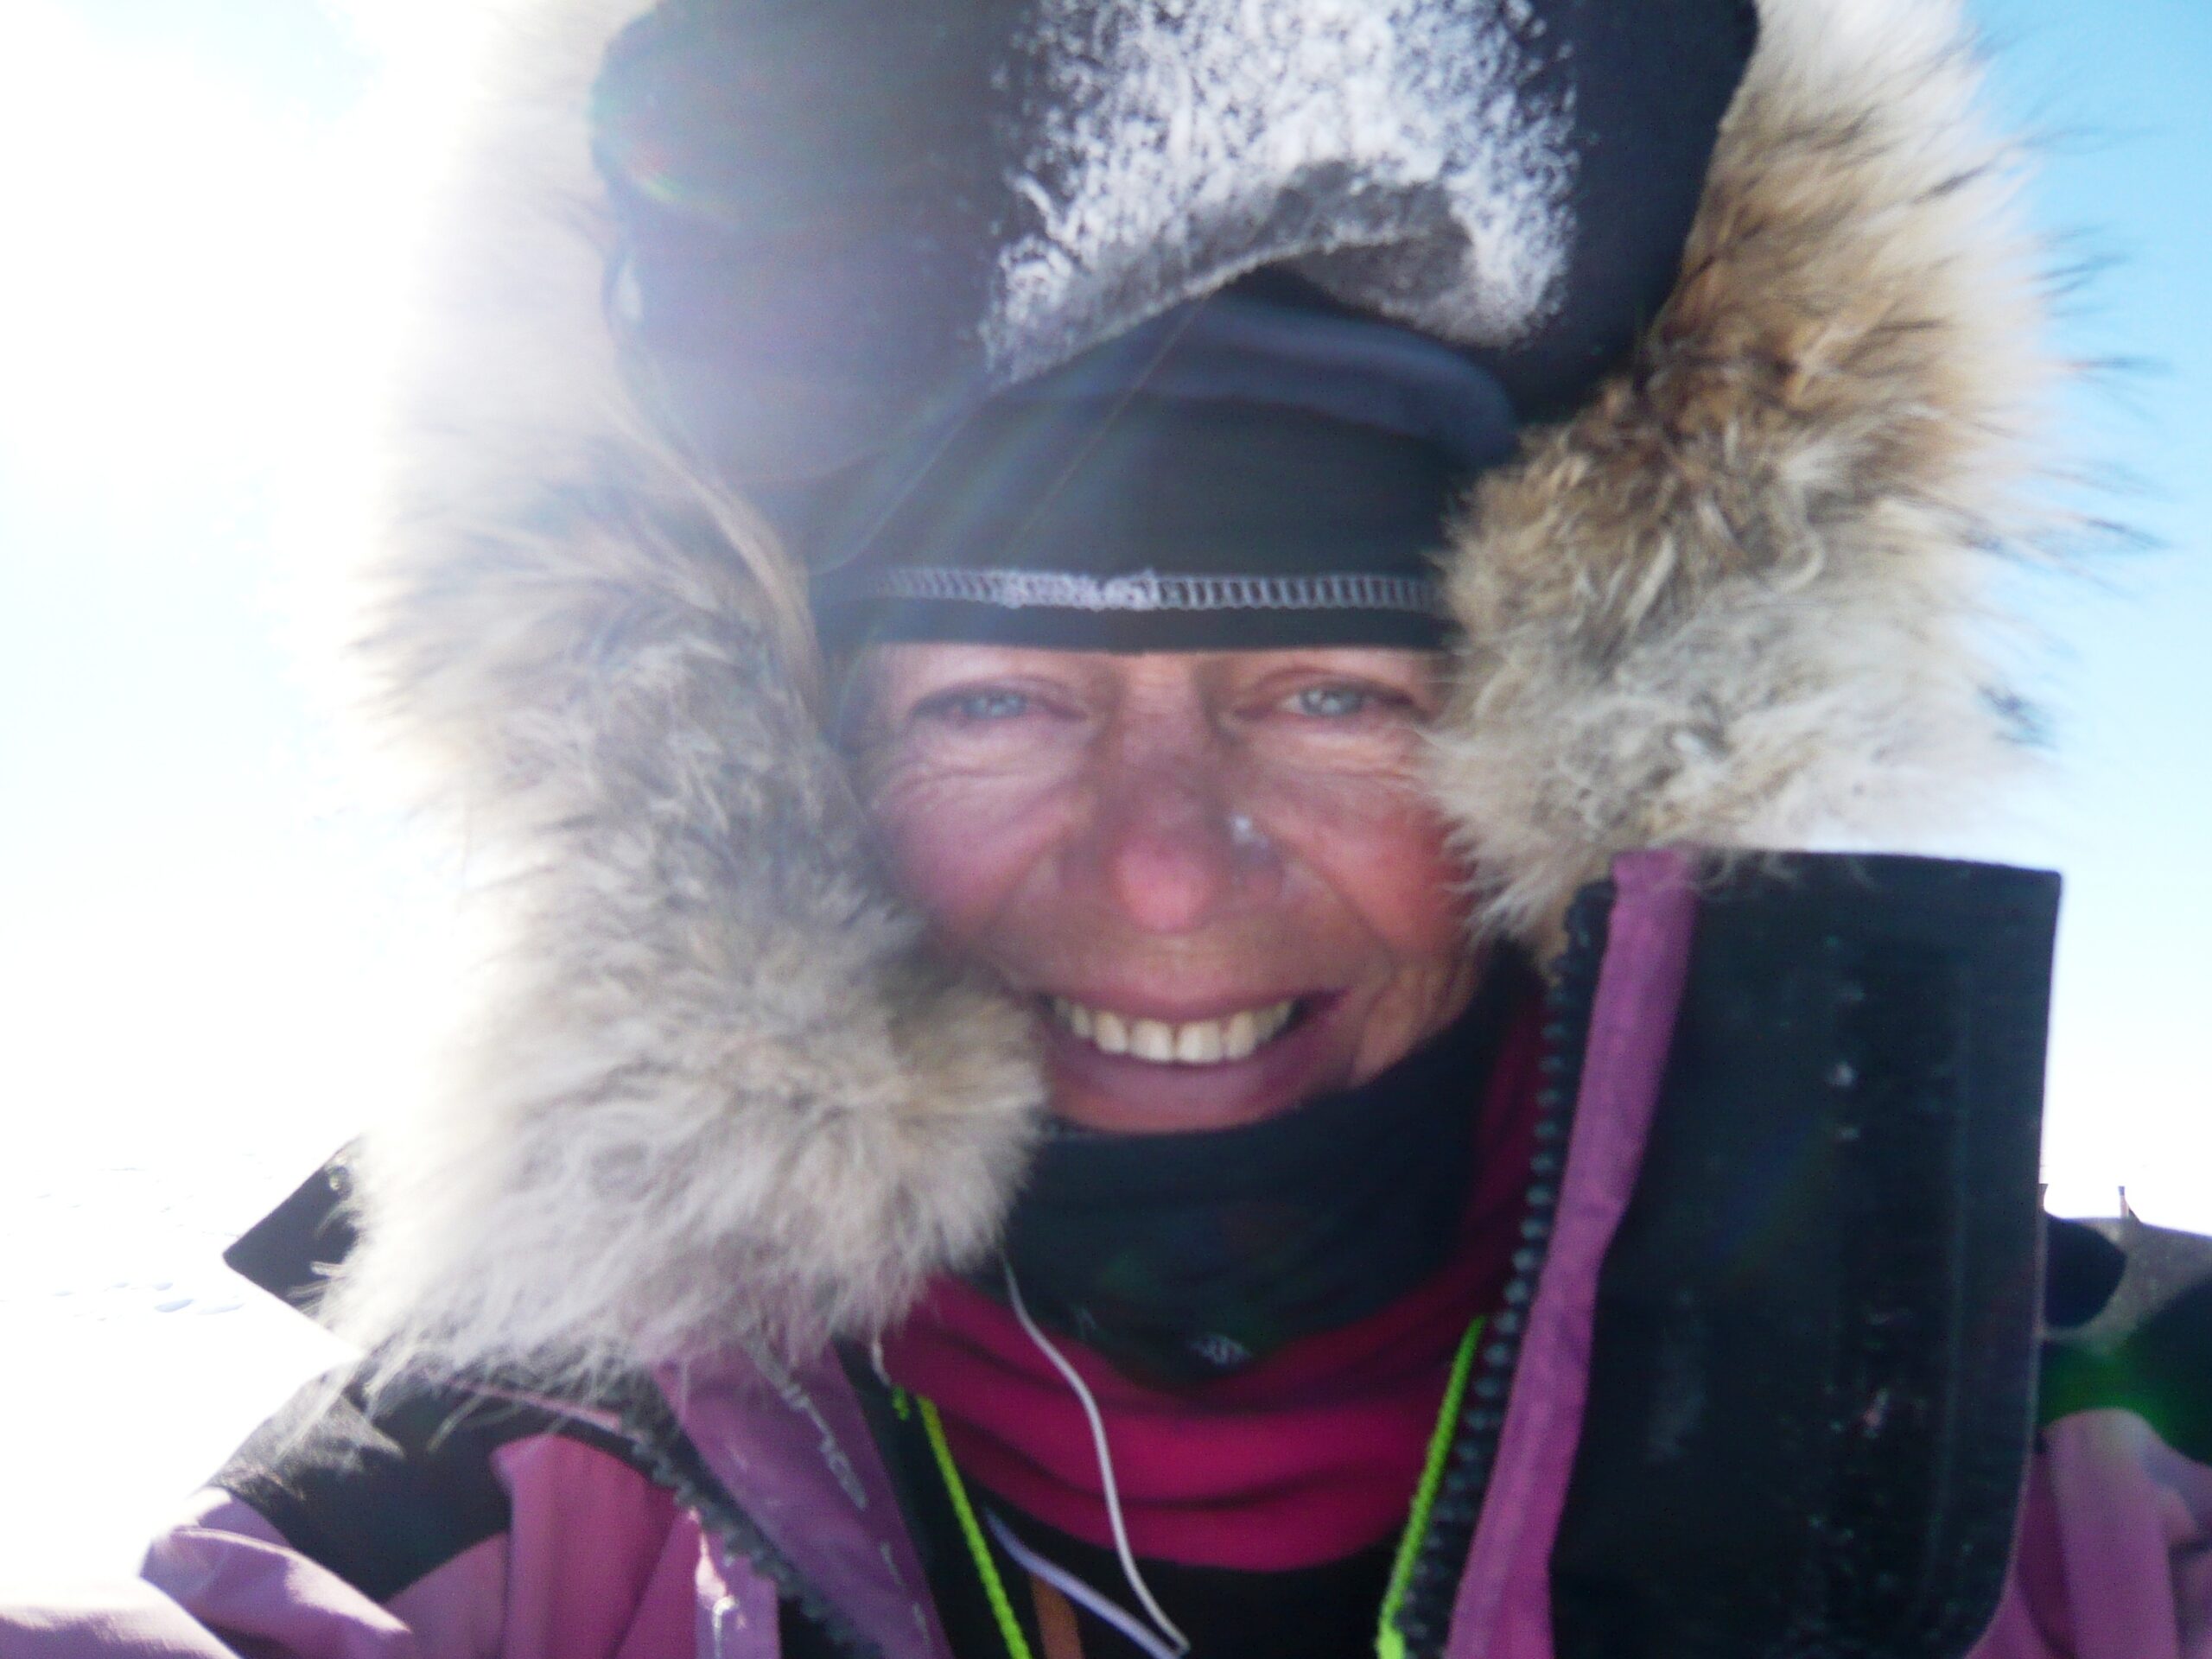 An image of Adventurer and author to deliver inspirational lecture